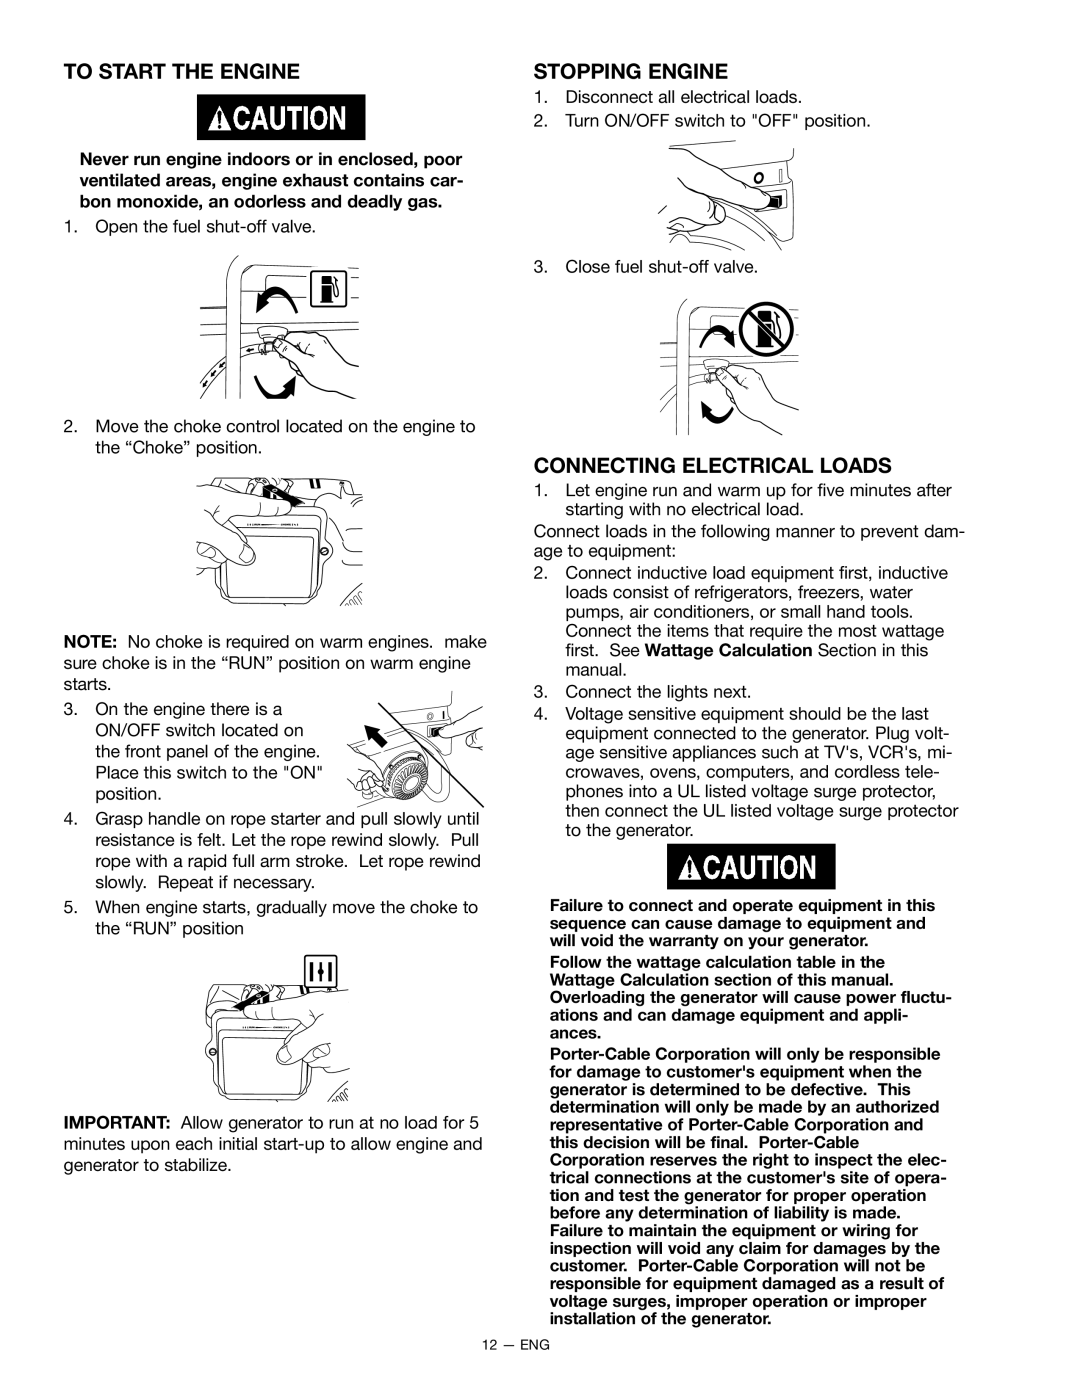 Porter-Cable BSI550 instruction manual To Start The Engine, Stopping Engine, Connecting Electrical Loads 